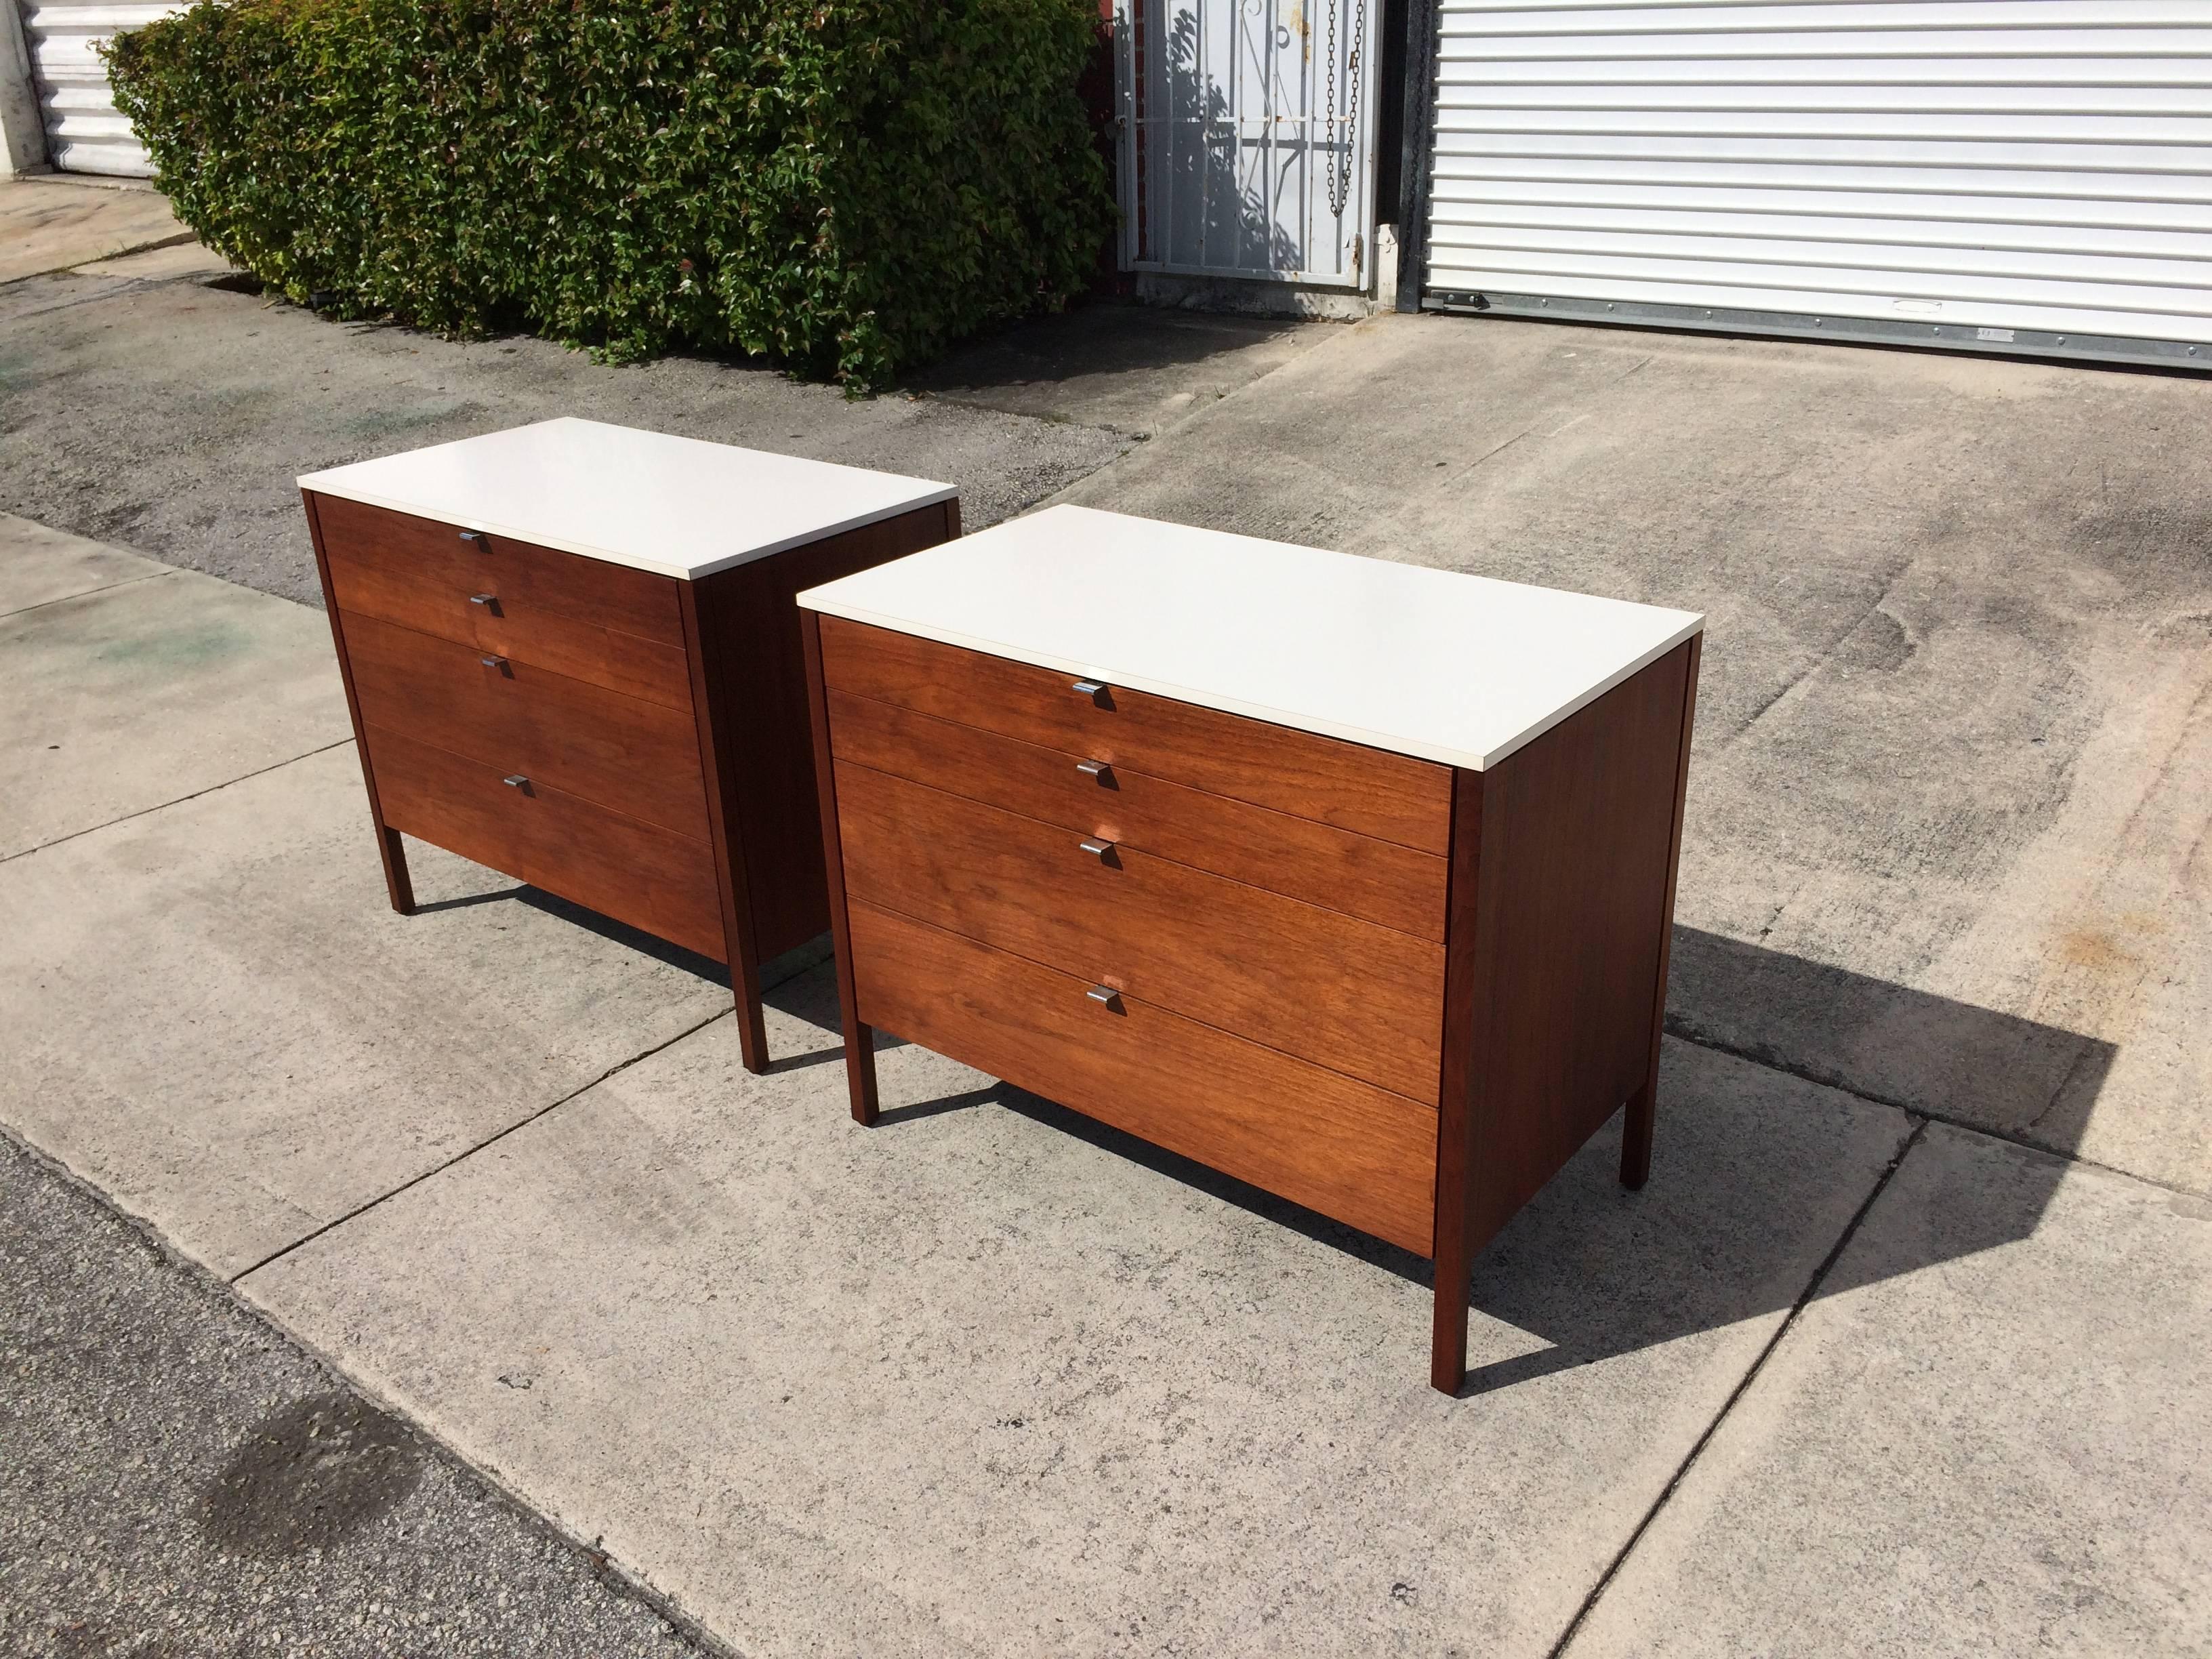 Walnut chests with white tops and backs, each chest has four drawers.